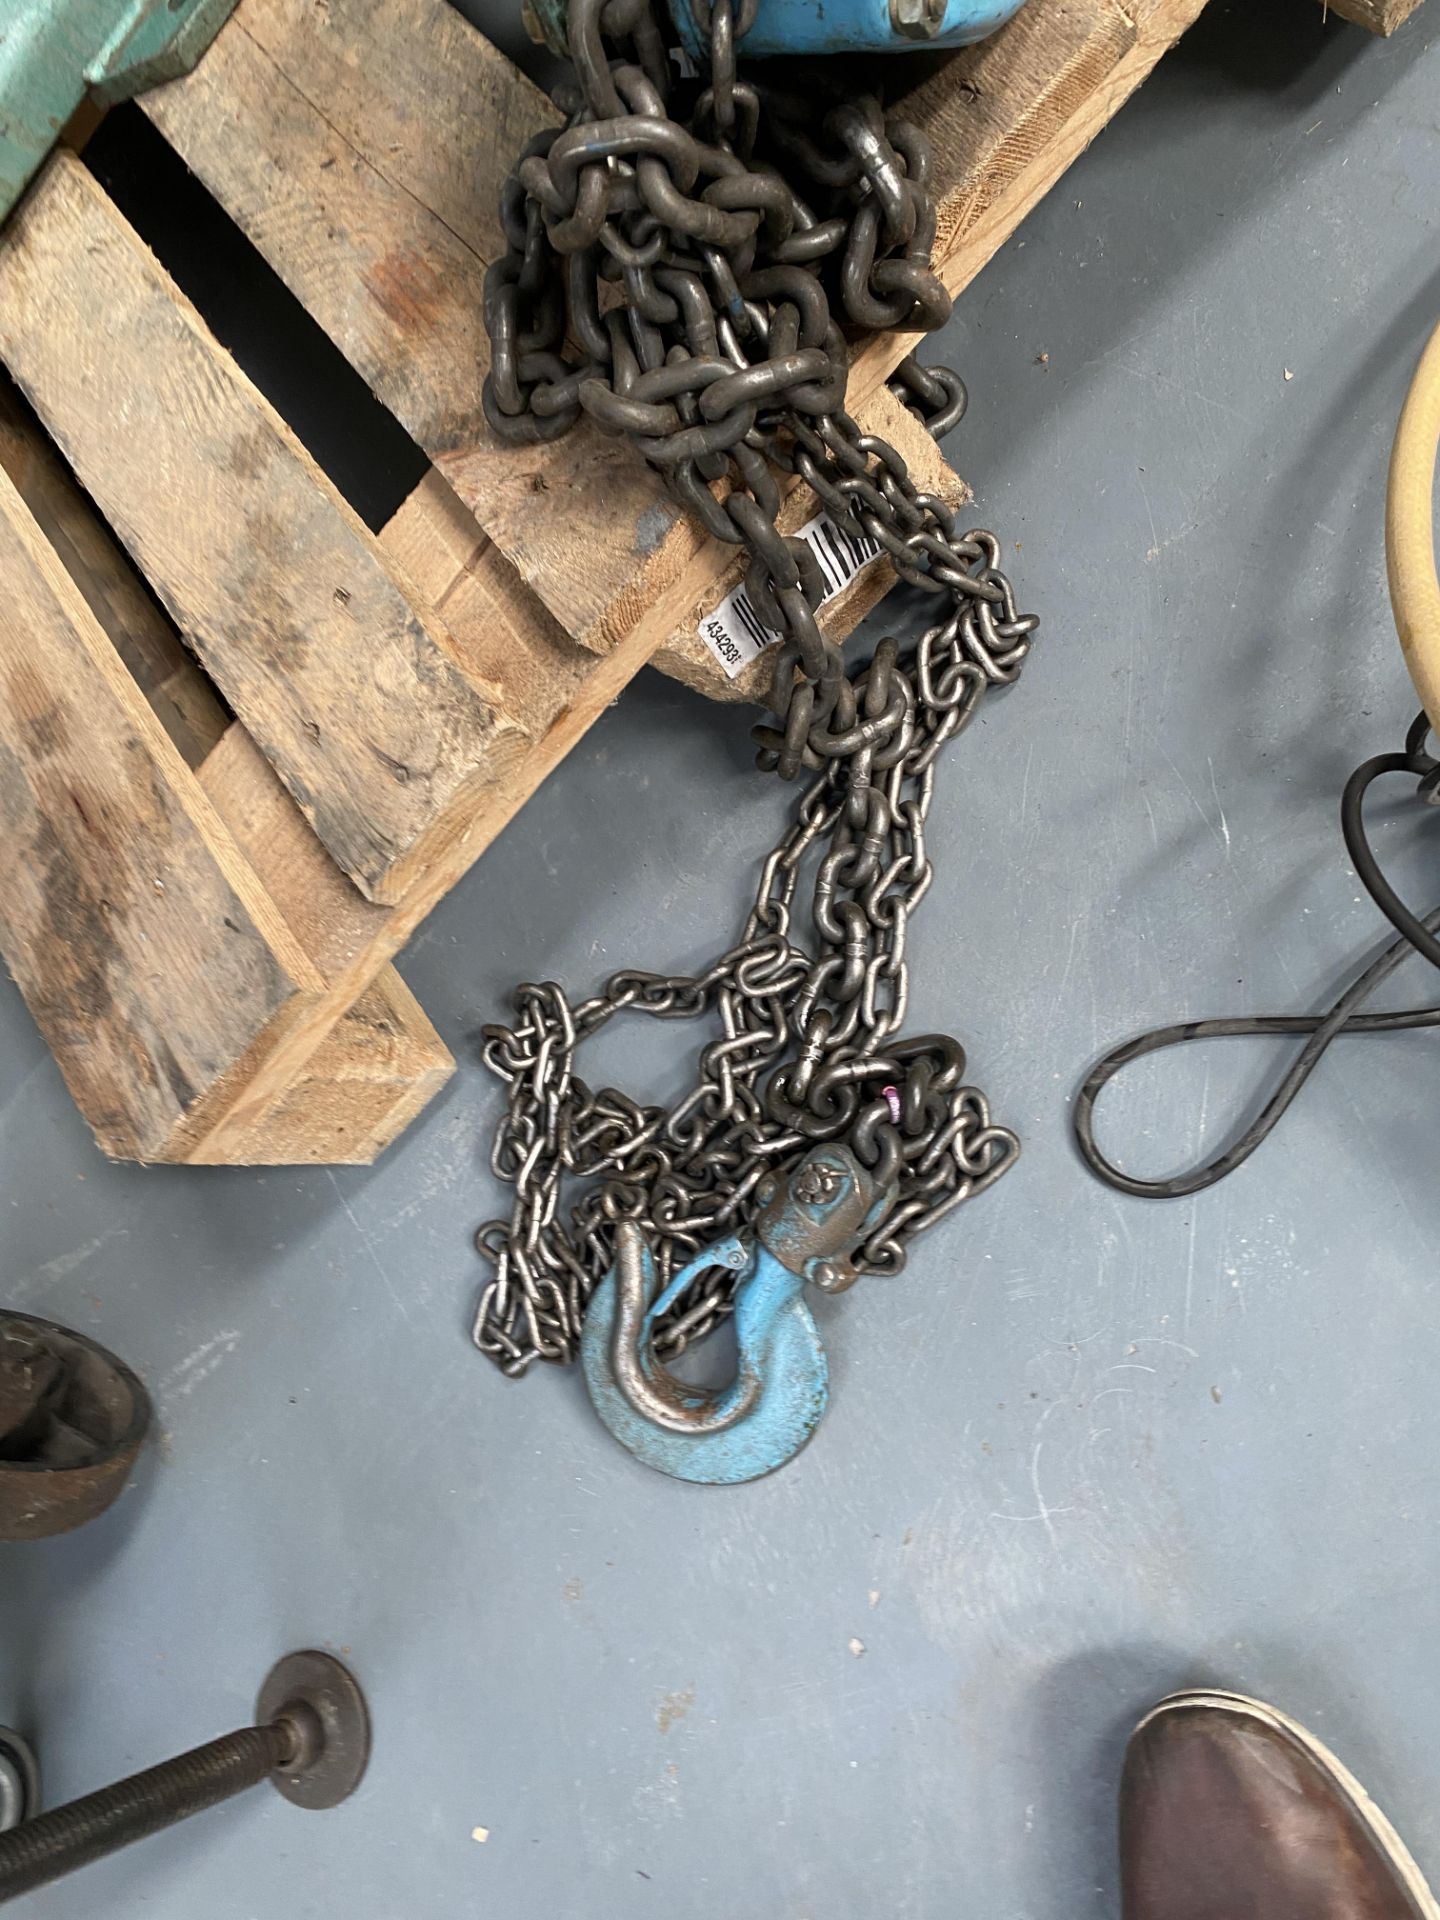 Watts Lifting Equipment, A Frame Lifting Gantry, SWL 2 Tons with chain hoist - Image 8 of 12